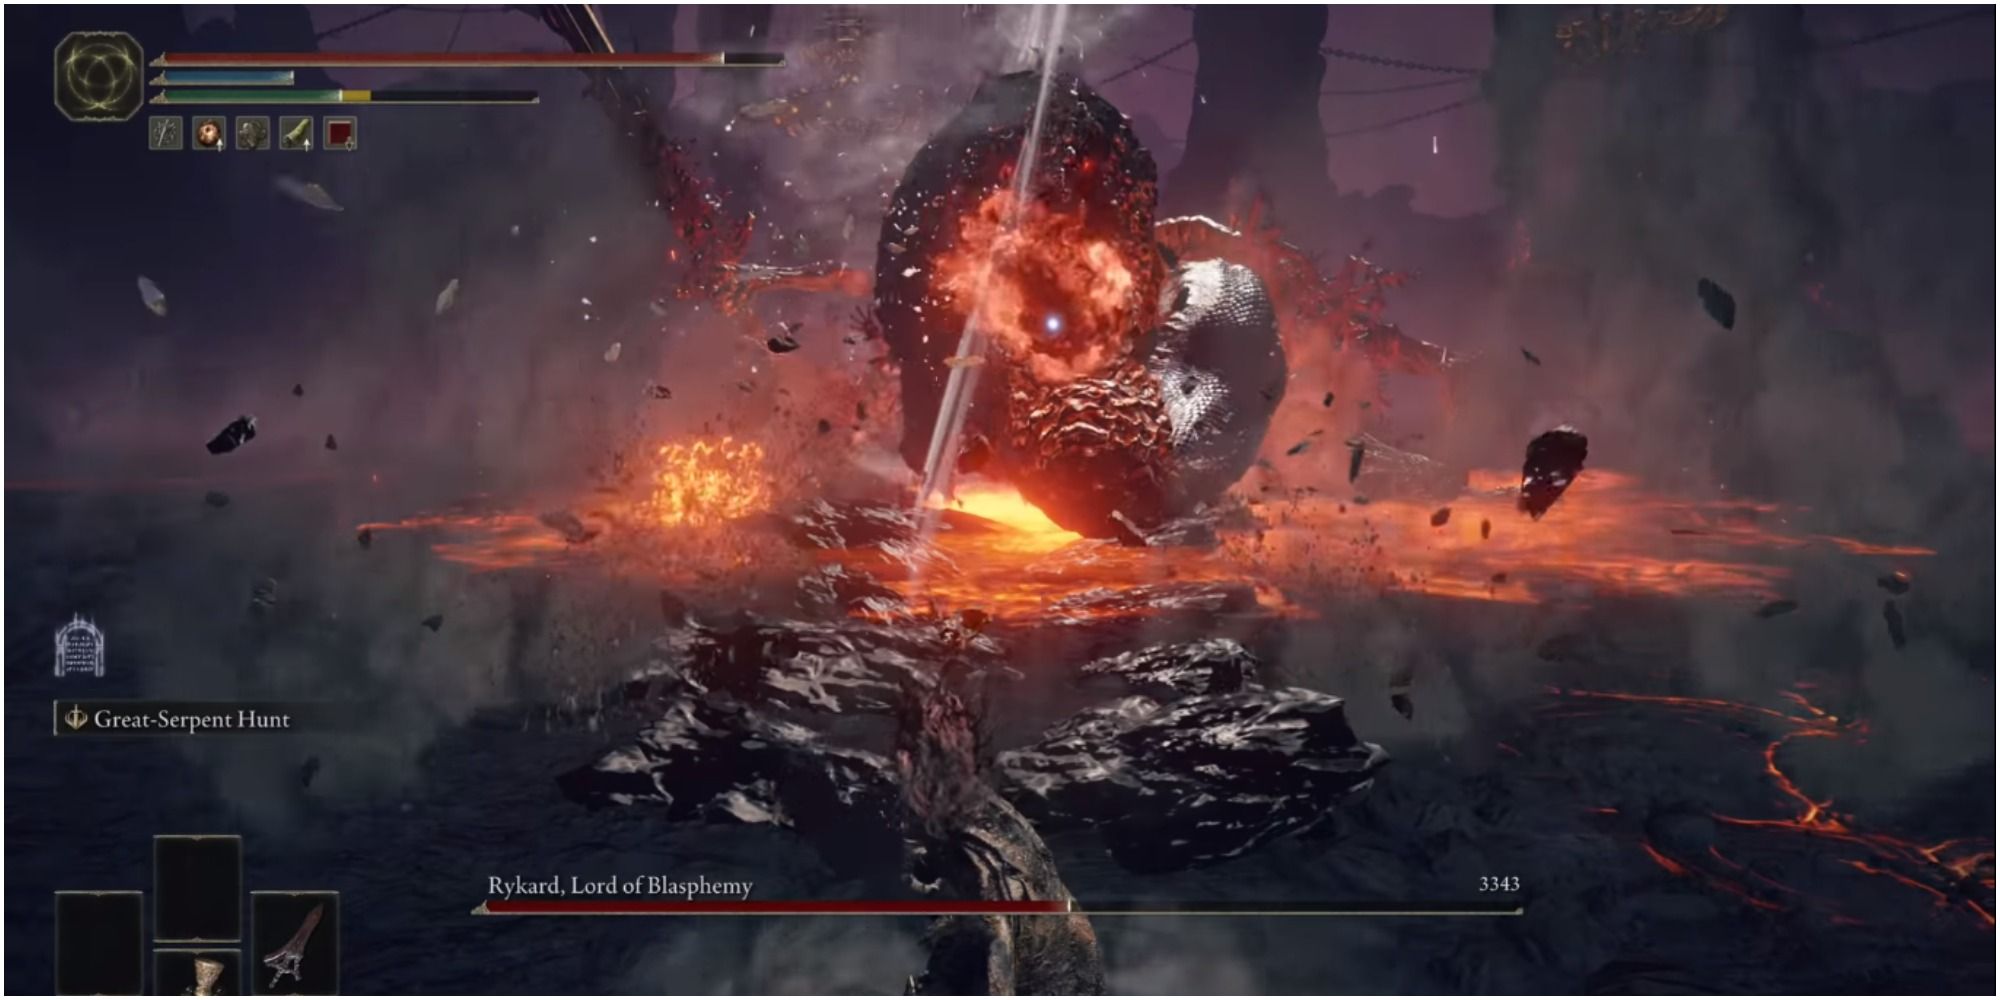 The boss spawning red skulls from his mouth to chase the player.